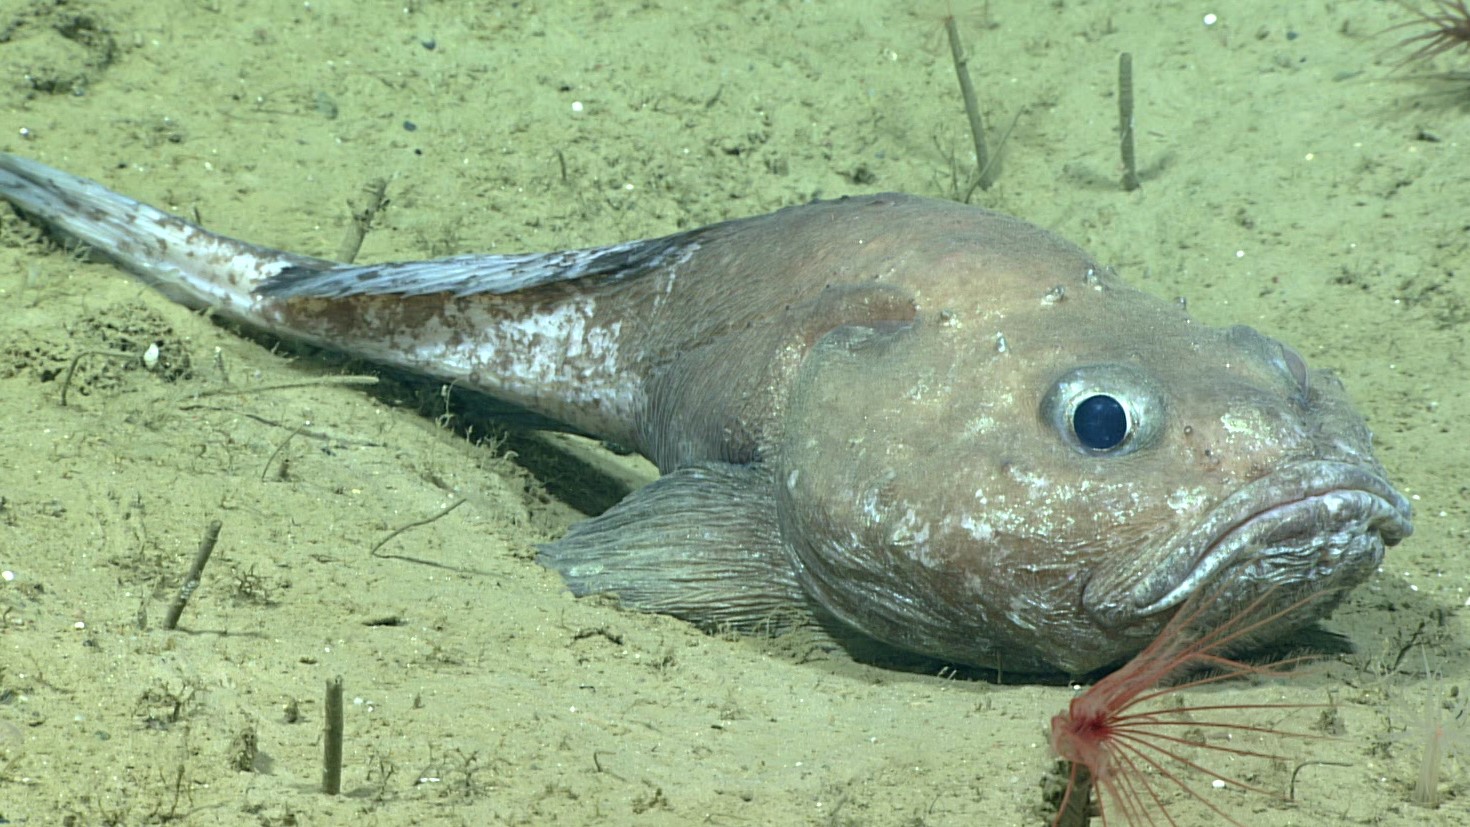 A fathead sculpin (Cottunculus sp.), a fish in the same family as the blobfish, is observed resting on the soft sediment bottom.